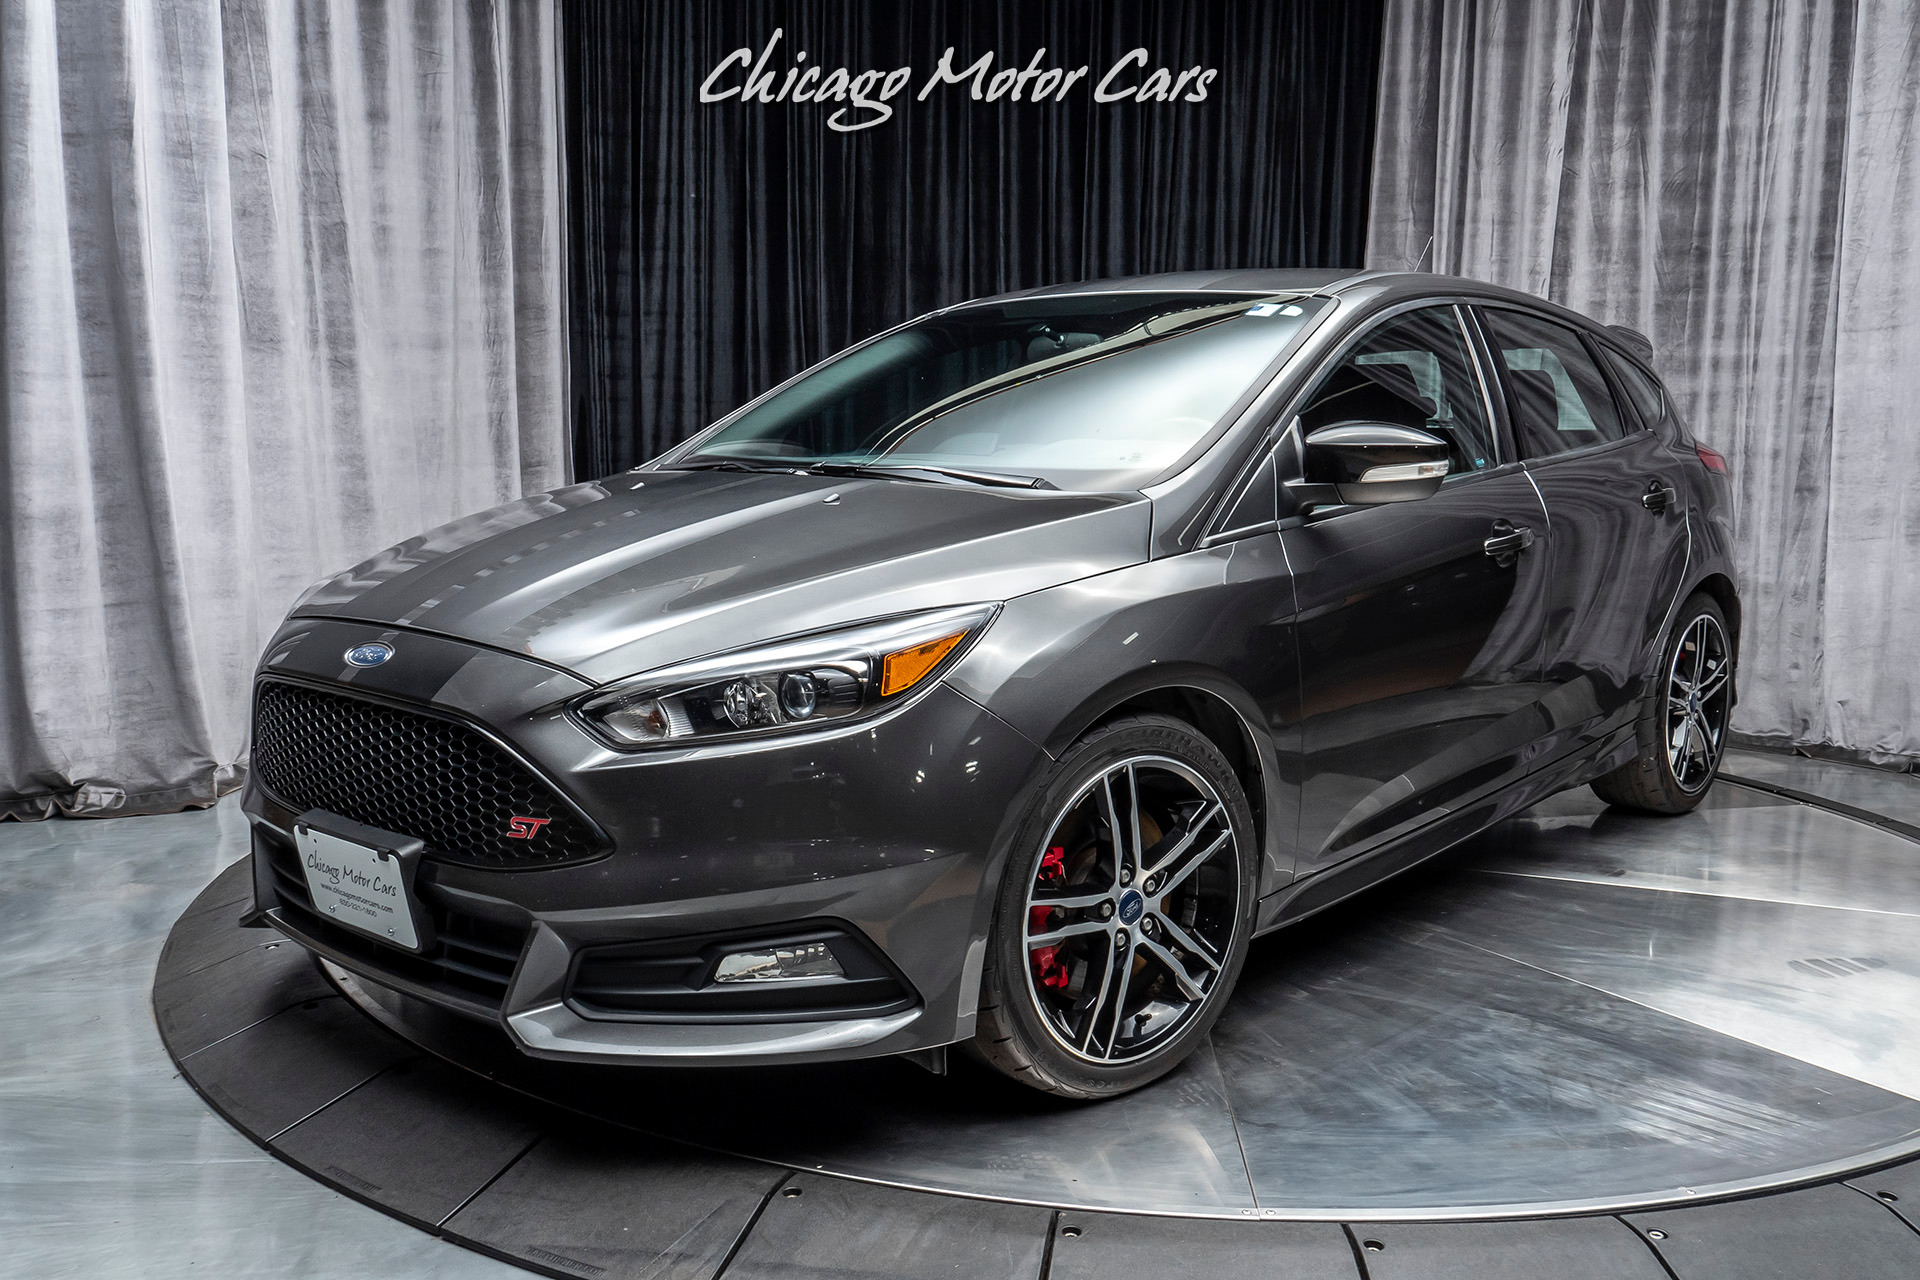 Used 2016 Ford Focus ST Hatchback TURBO 6-SPEED MANUAL! EQUIPMENT GROUP  402A! For Sale (Special Pricing) | Chicago Motor Cars Stock #16463